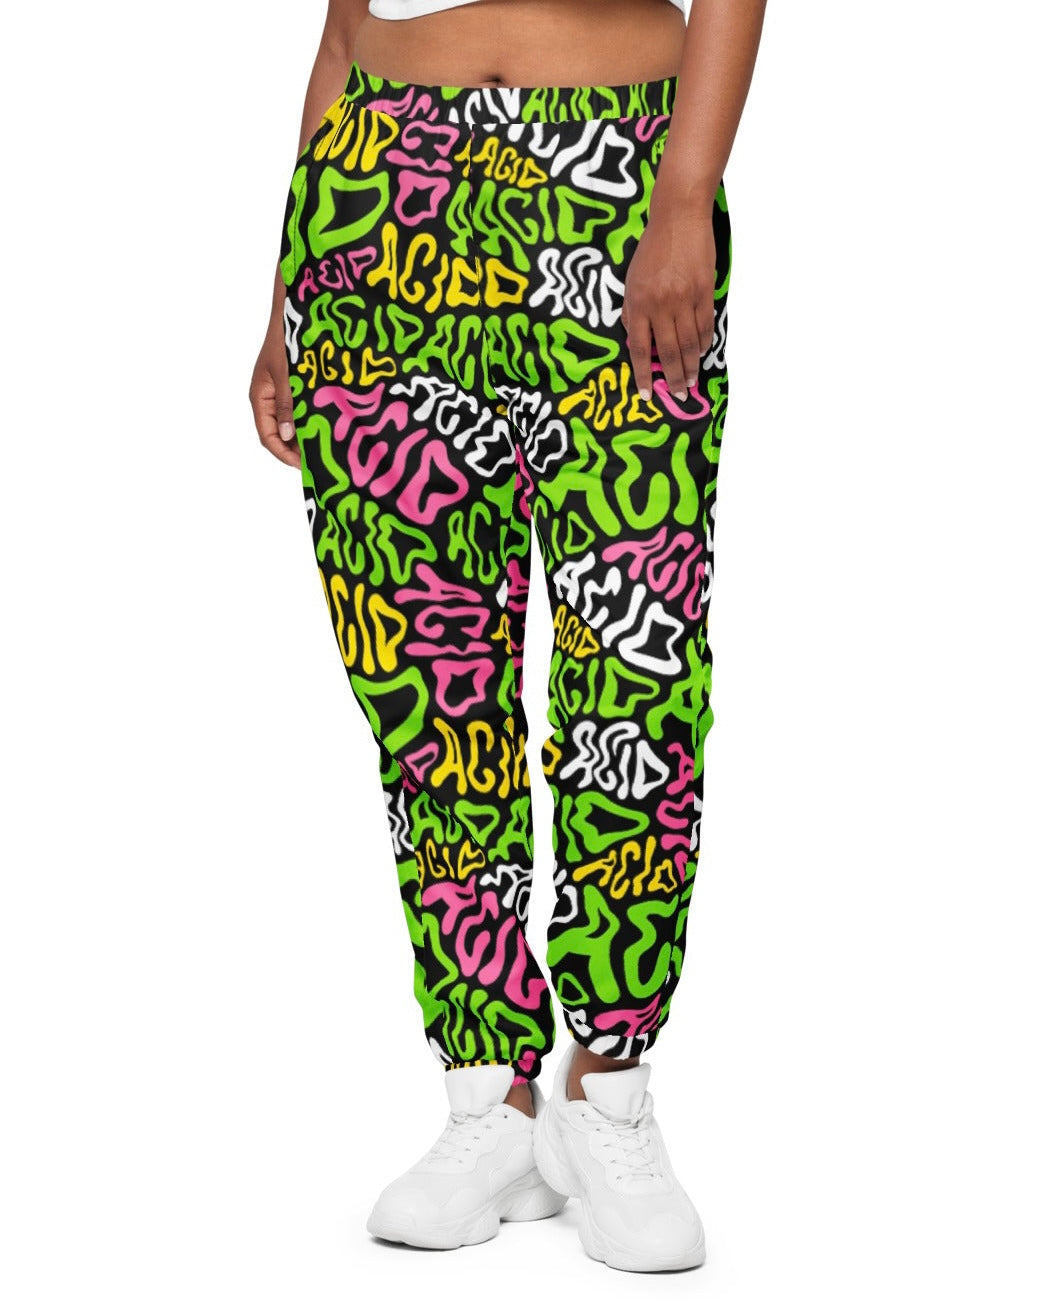 Candy Acid Track Pants, Track Pants, - One Stop Rave